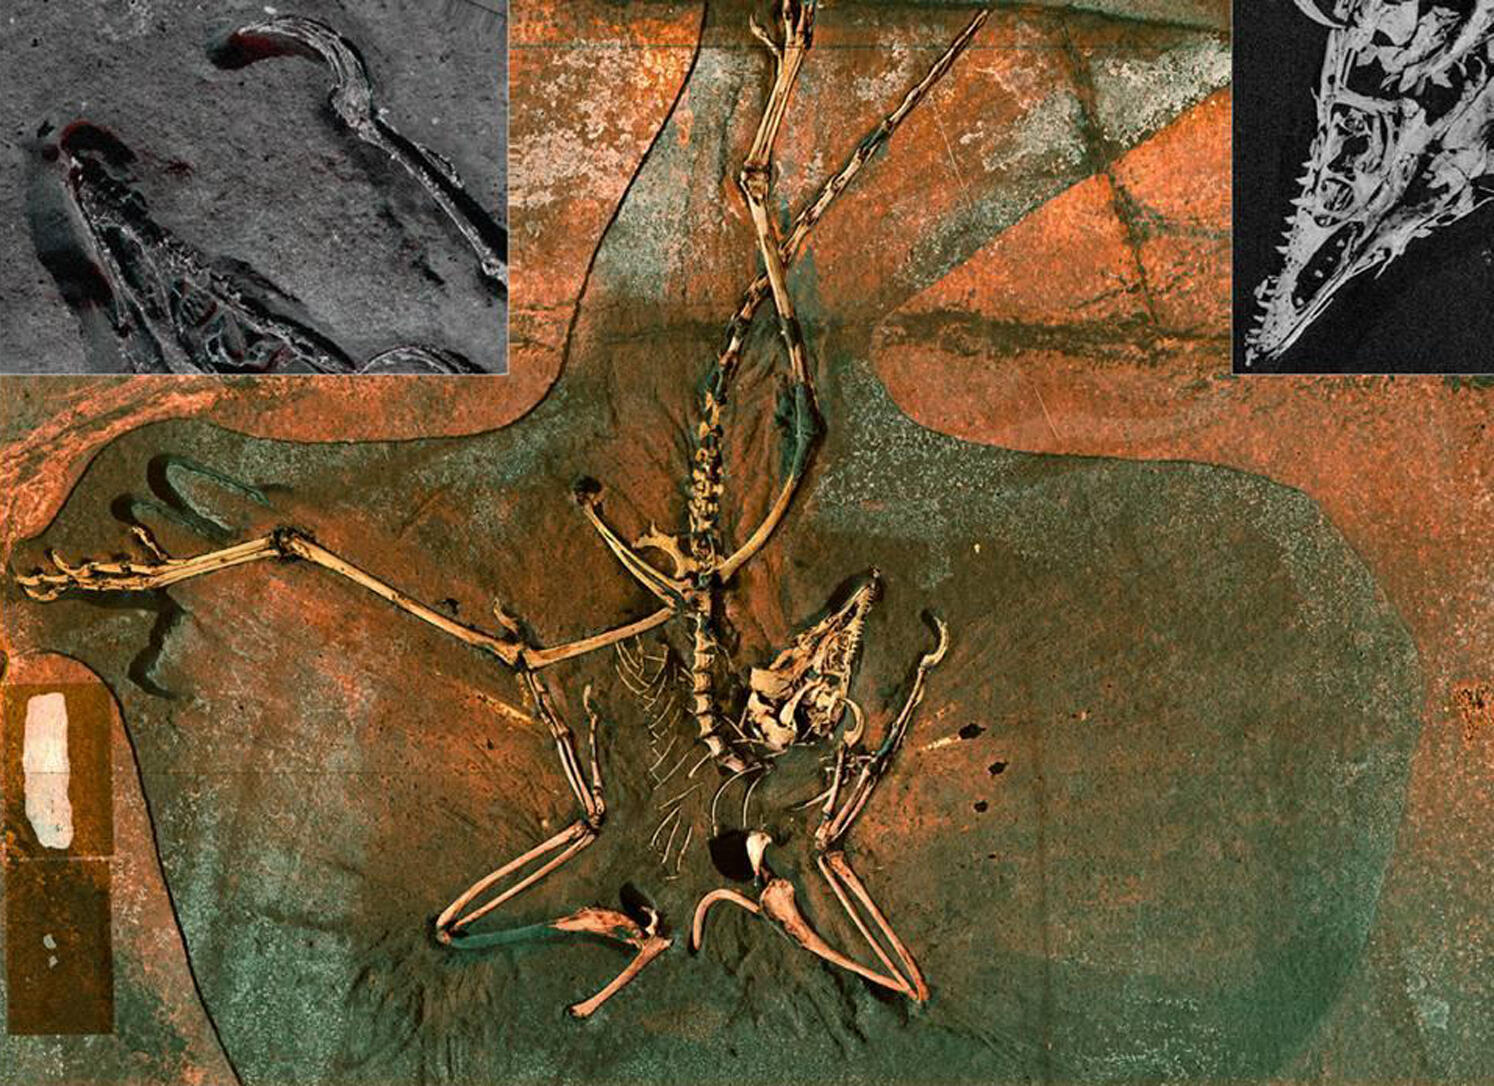 An Archeopteryx fossil, considered to be "the first bird in history"photographed in 2010.